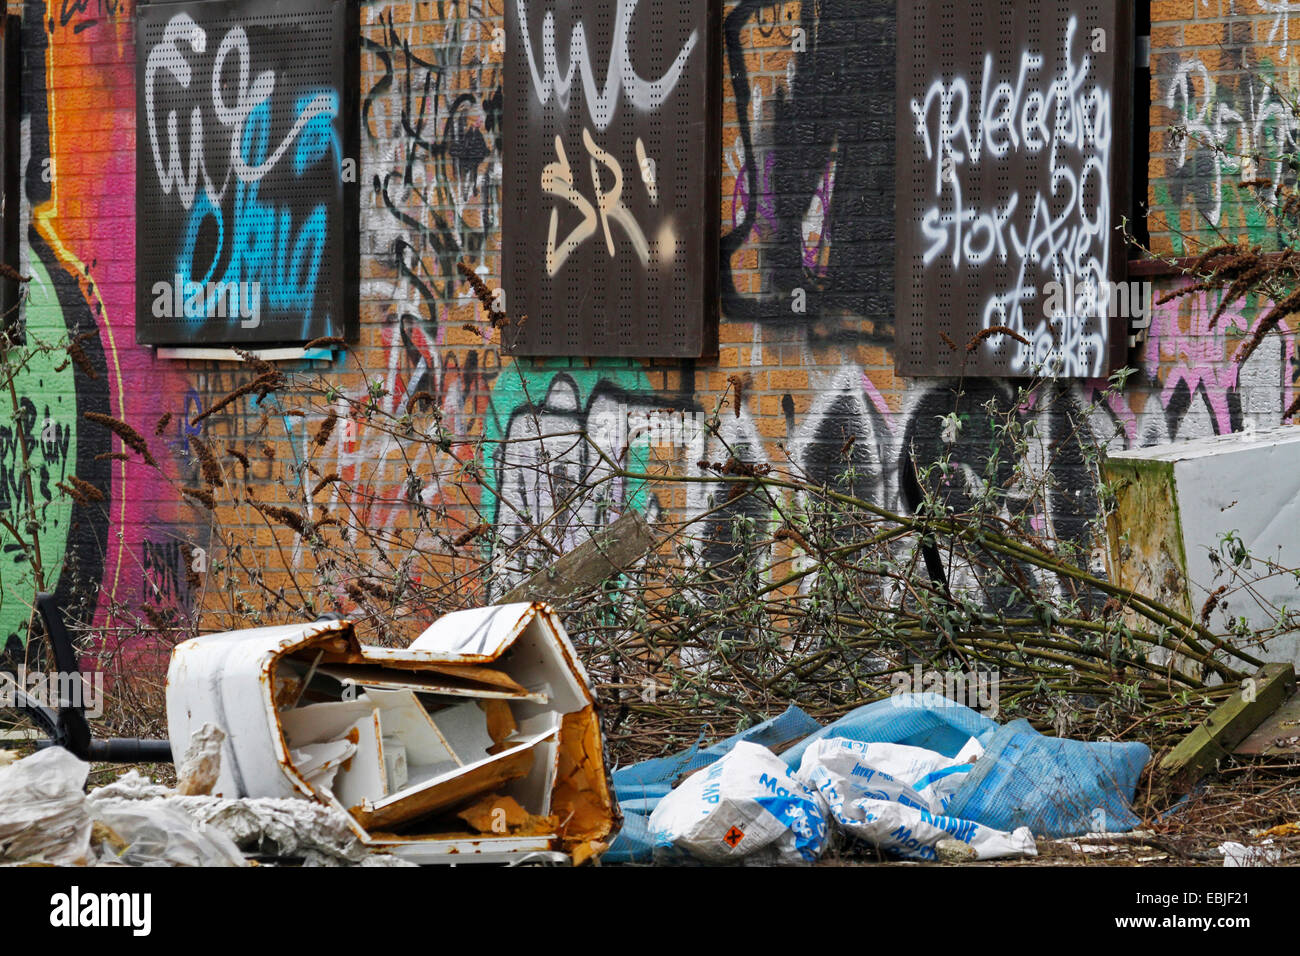 graffitis and illegal garbage dump at an abandonned railway system, Germany, North Rhine-Westphalia, Ruhr Area, Essen Stock Photo